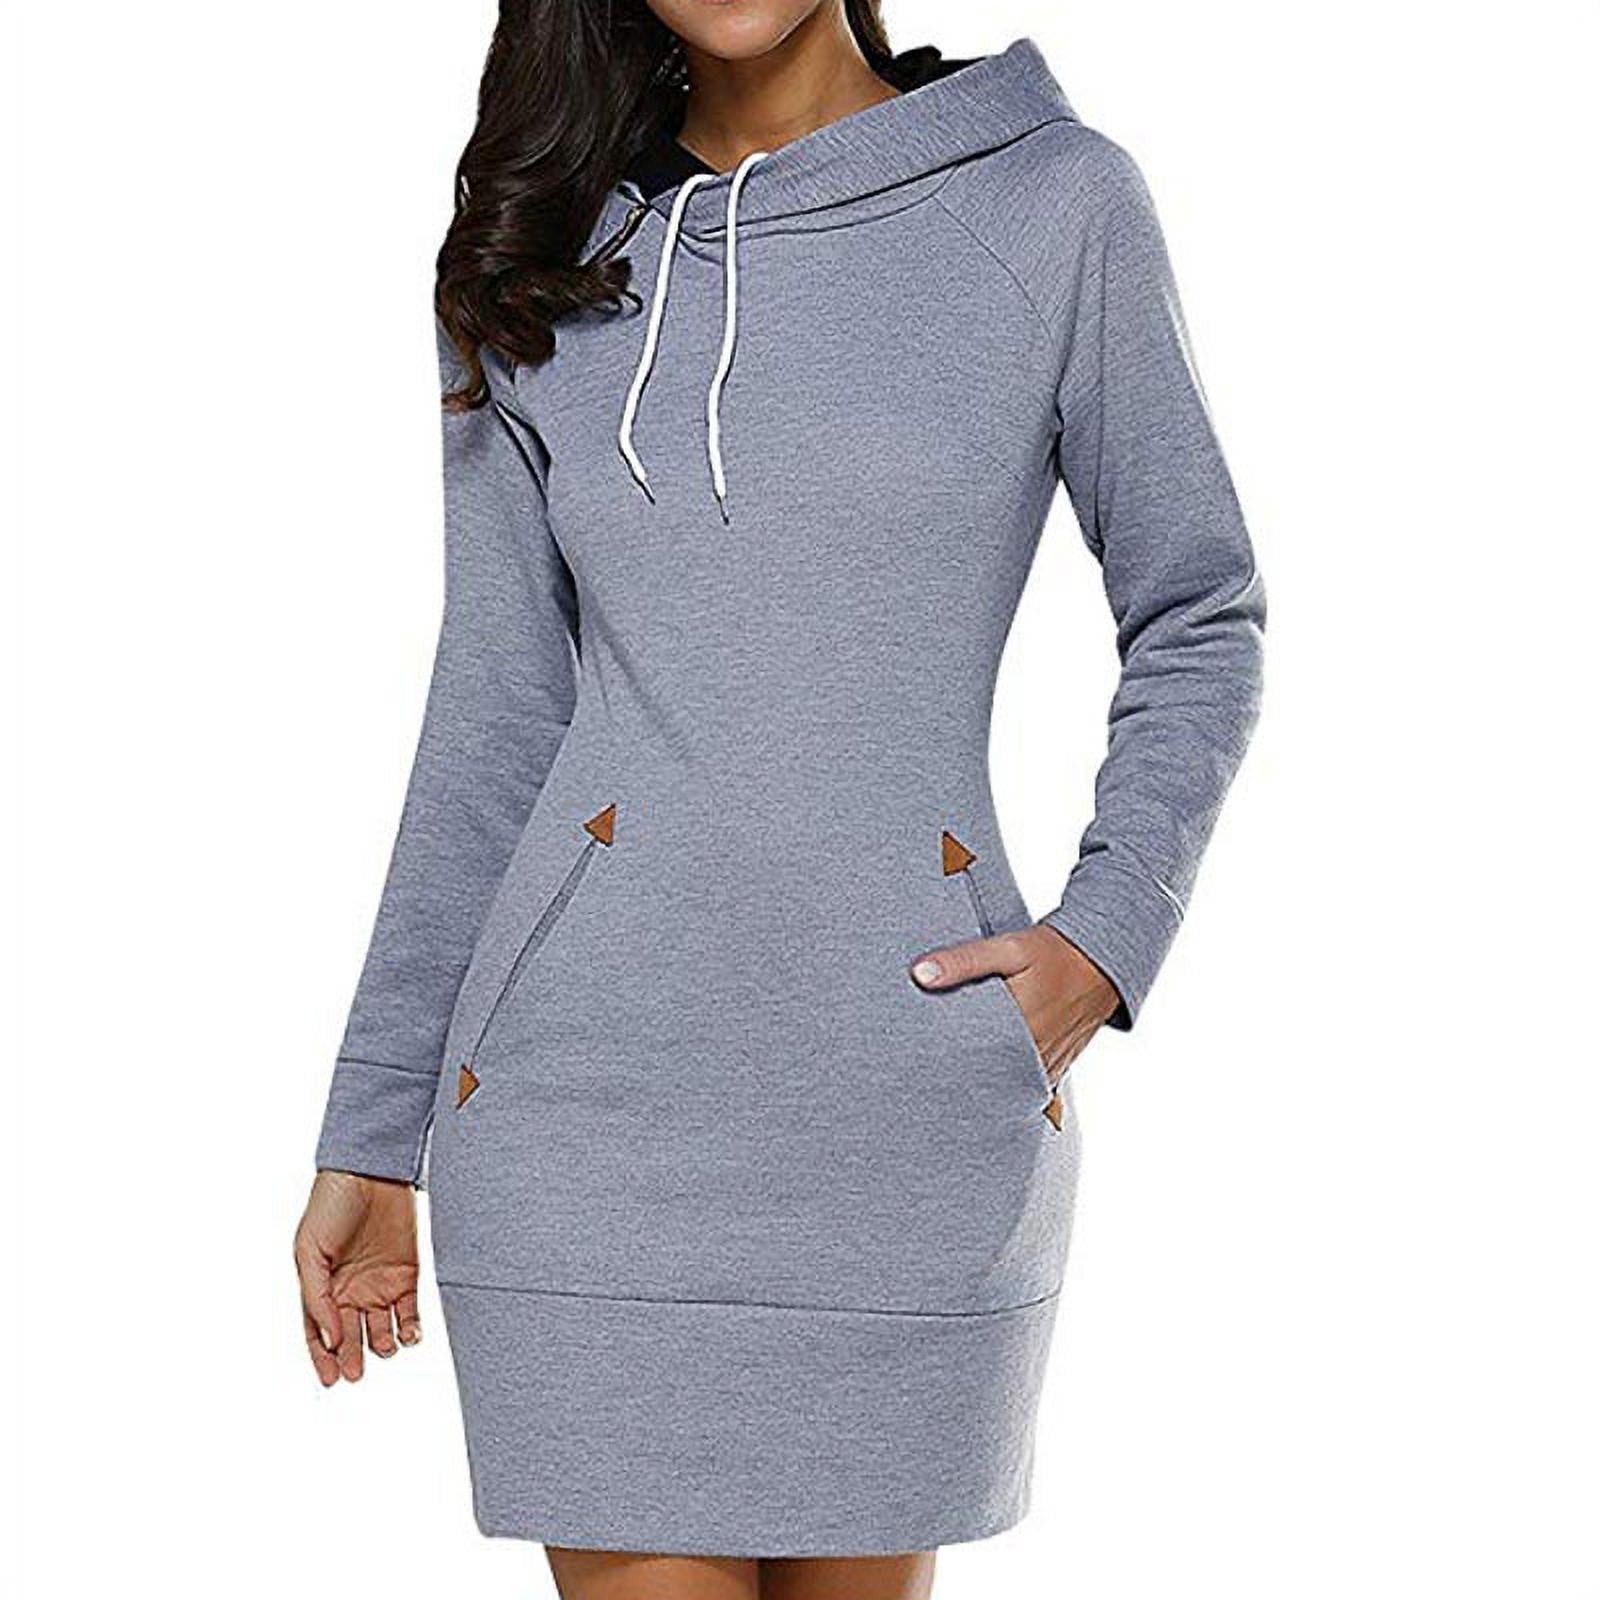 ZYZROSE Womens Casual Long Sleeve Loose Pullover Hooded Dress Sweatshirt Tunic Horse Pink